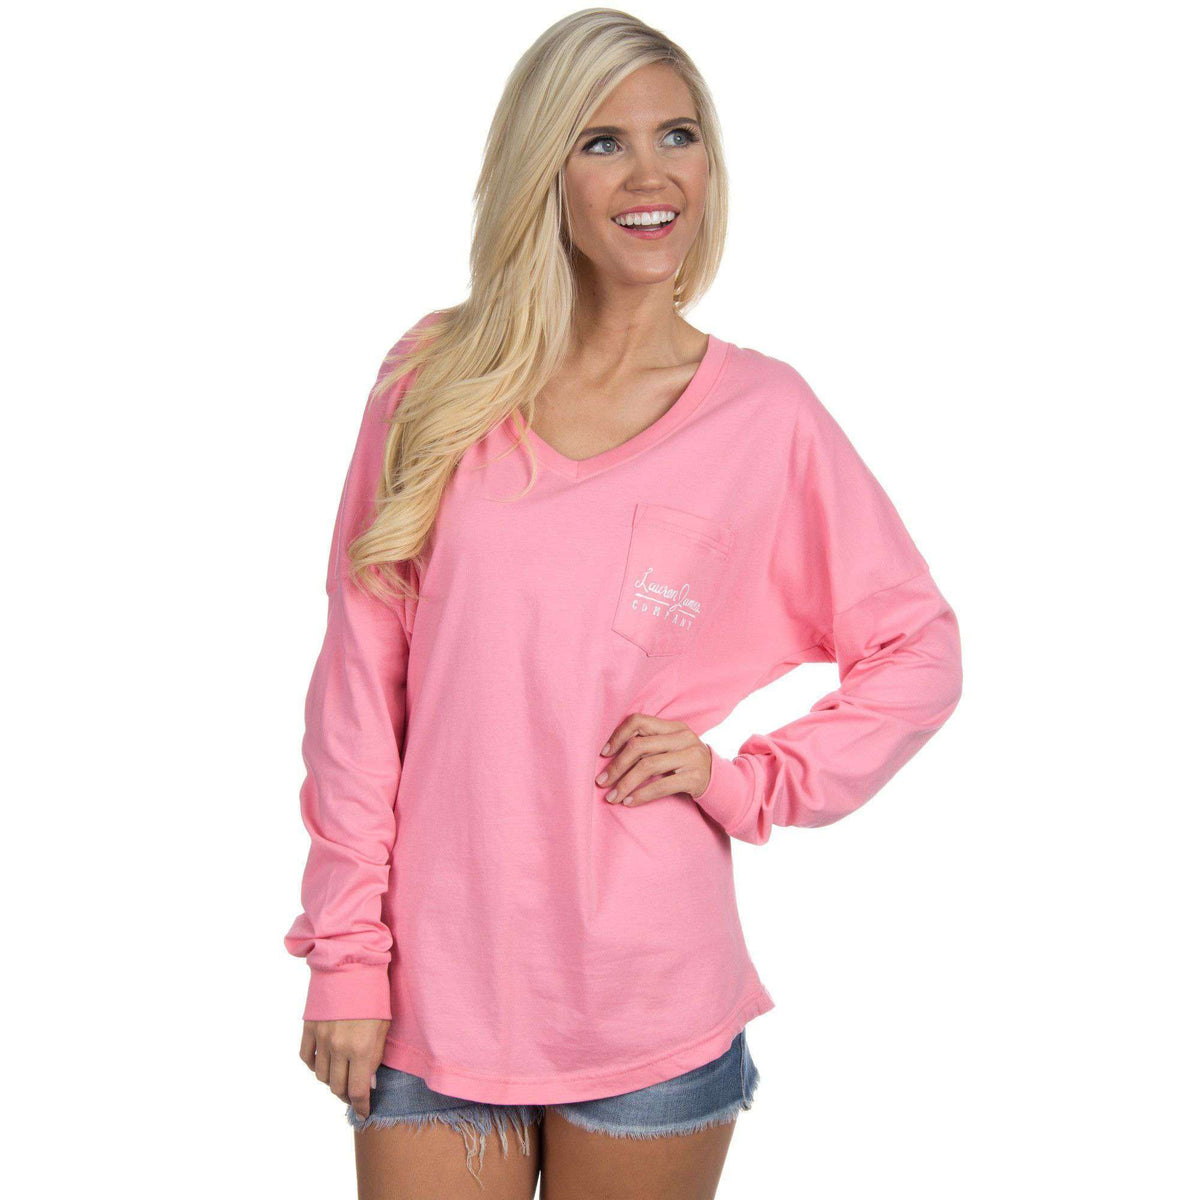 V-Neck Logo Long Sleeve Jersey in Pink by Lauren James - Country Club Prep